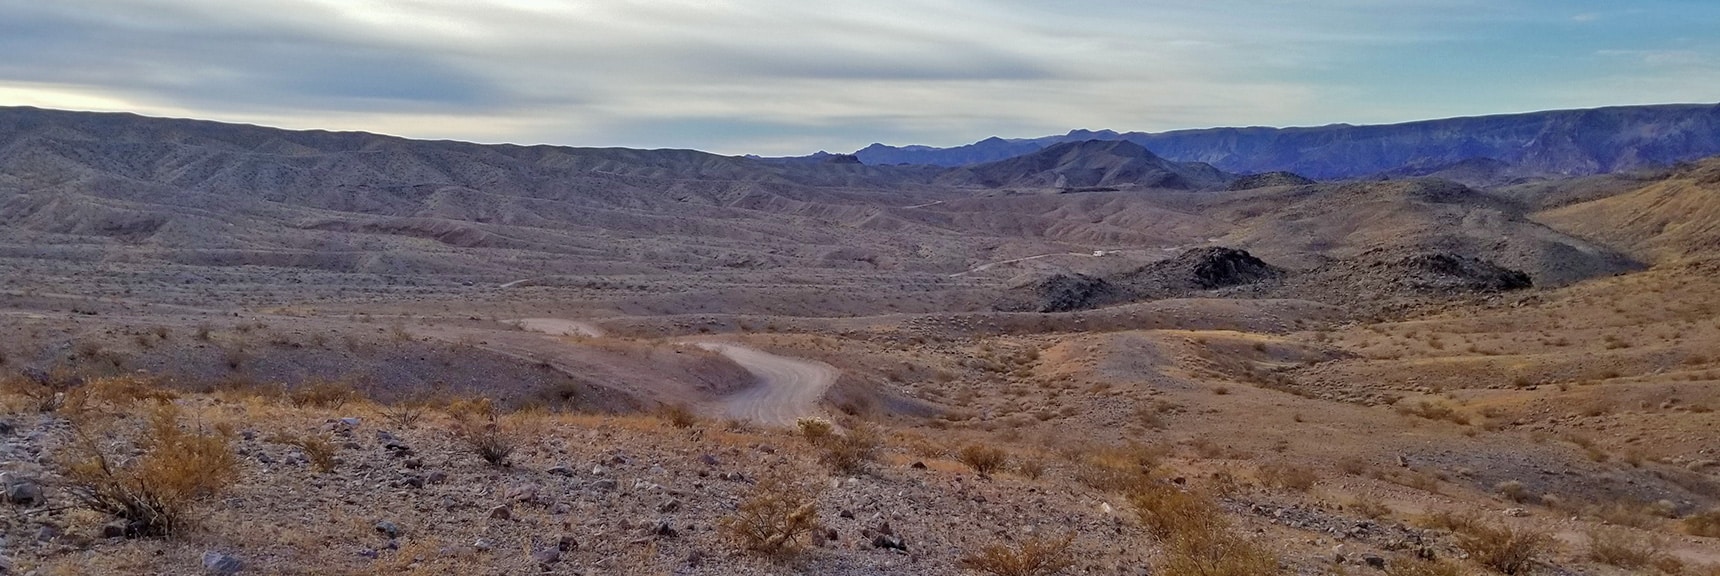 High Point View Down Kingman Wash Rd South | Fortification Hill | Lake Mead National Recreation Area, Arizona